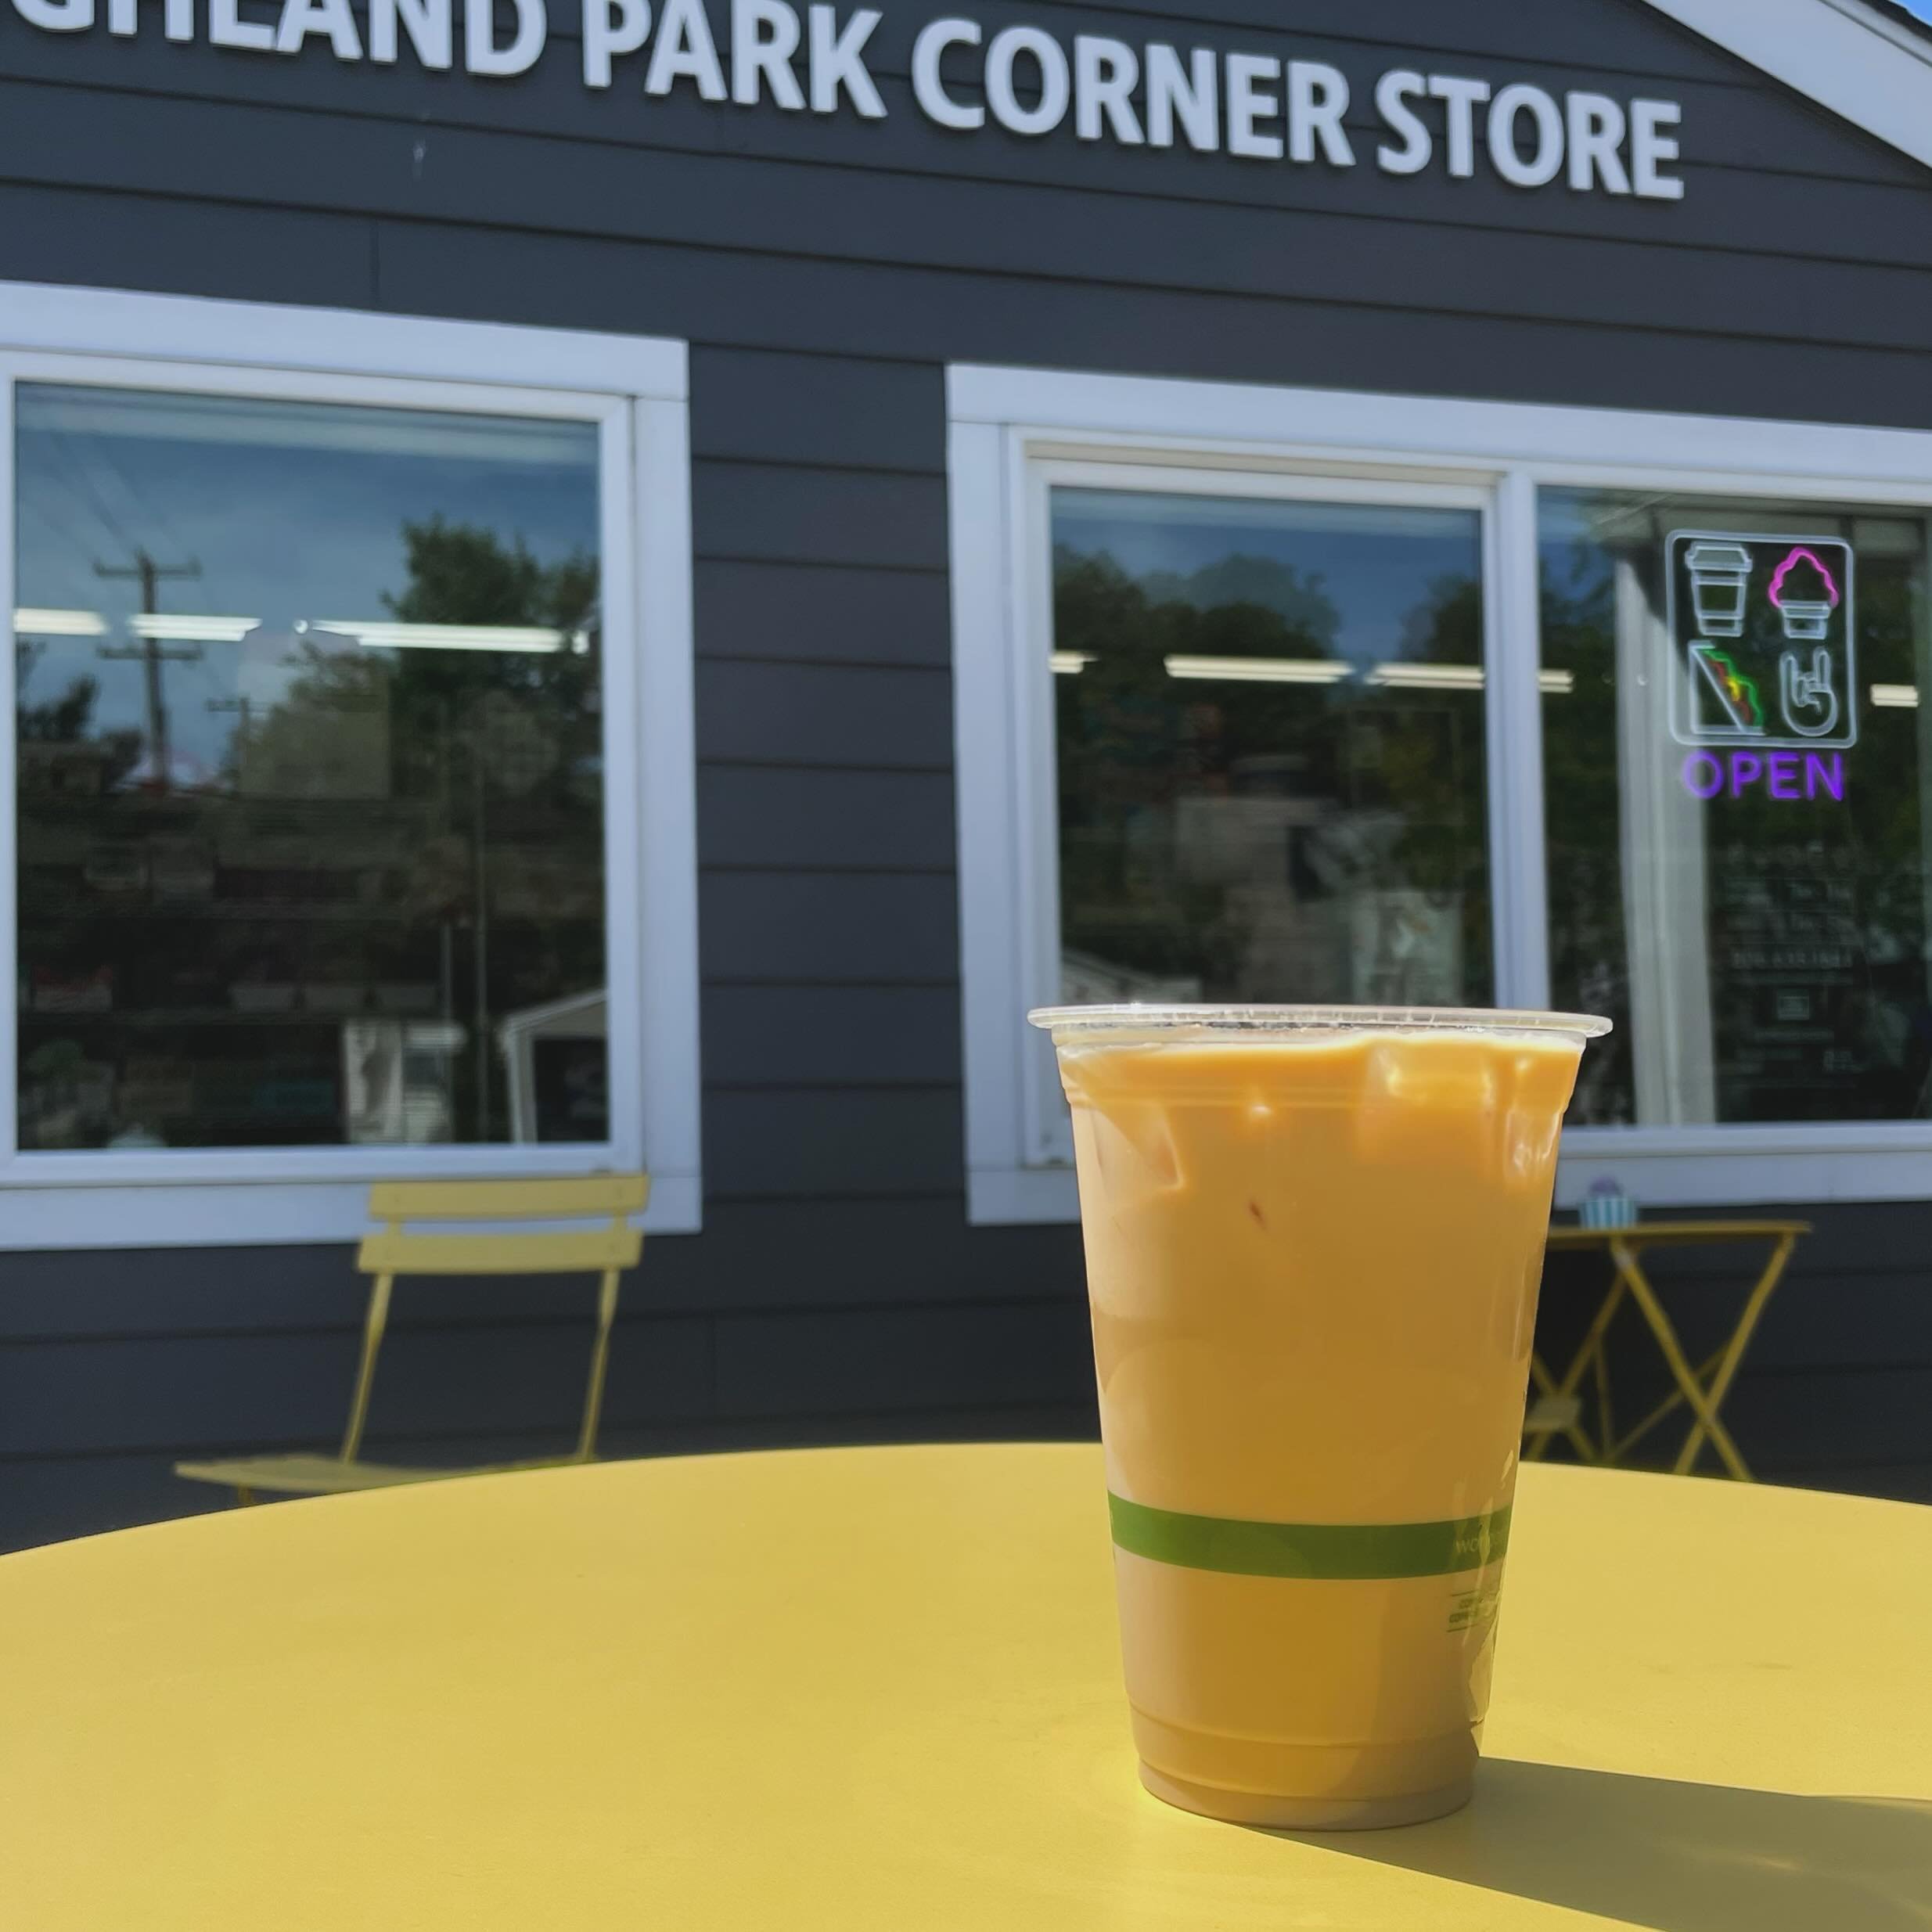 This sunshine has us ready for summertime! Our newest drink is Heat Waves - housemade hot honey with espresso and milk. It&rsquo;s great iced or hot - and it has a kick! 🌶️

#heatwaves #hothoney #honeylatte #hothoneylatte #🐝 #highlandpark #cornerst